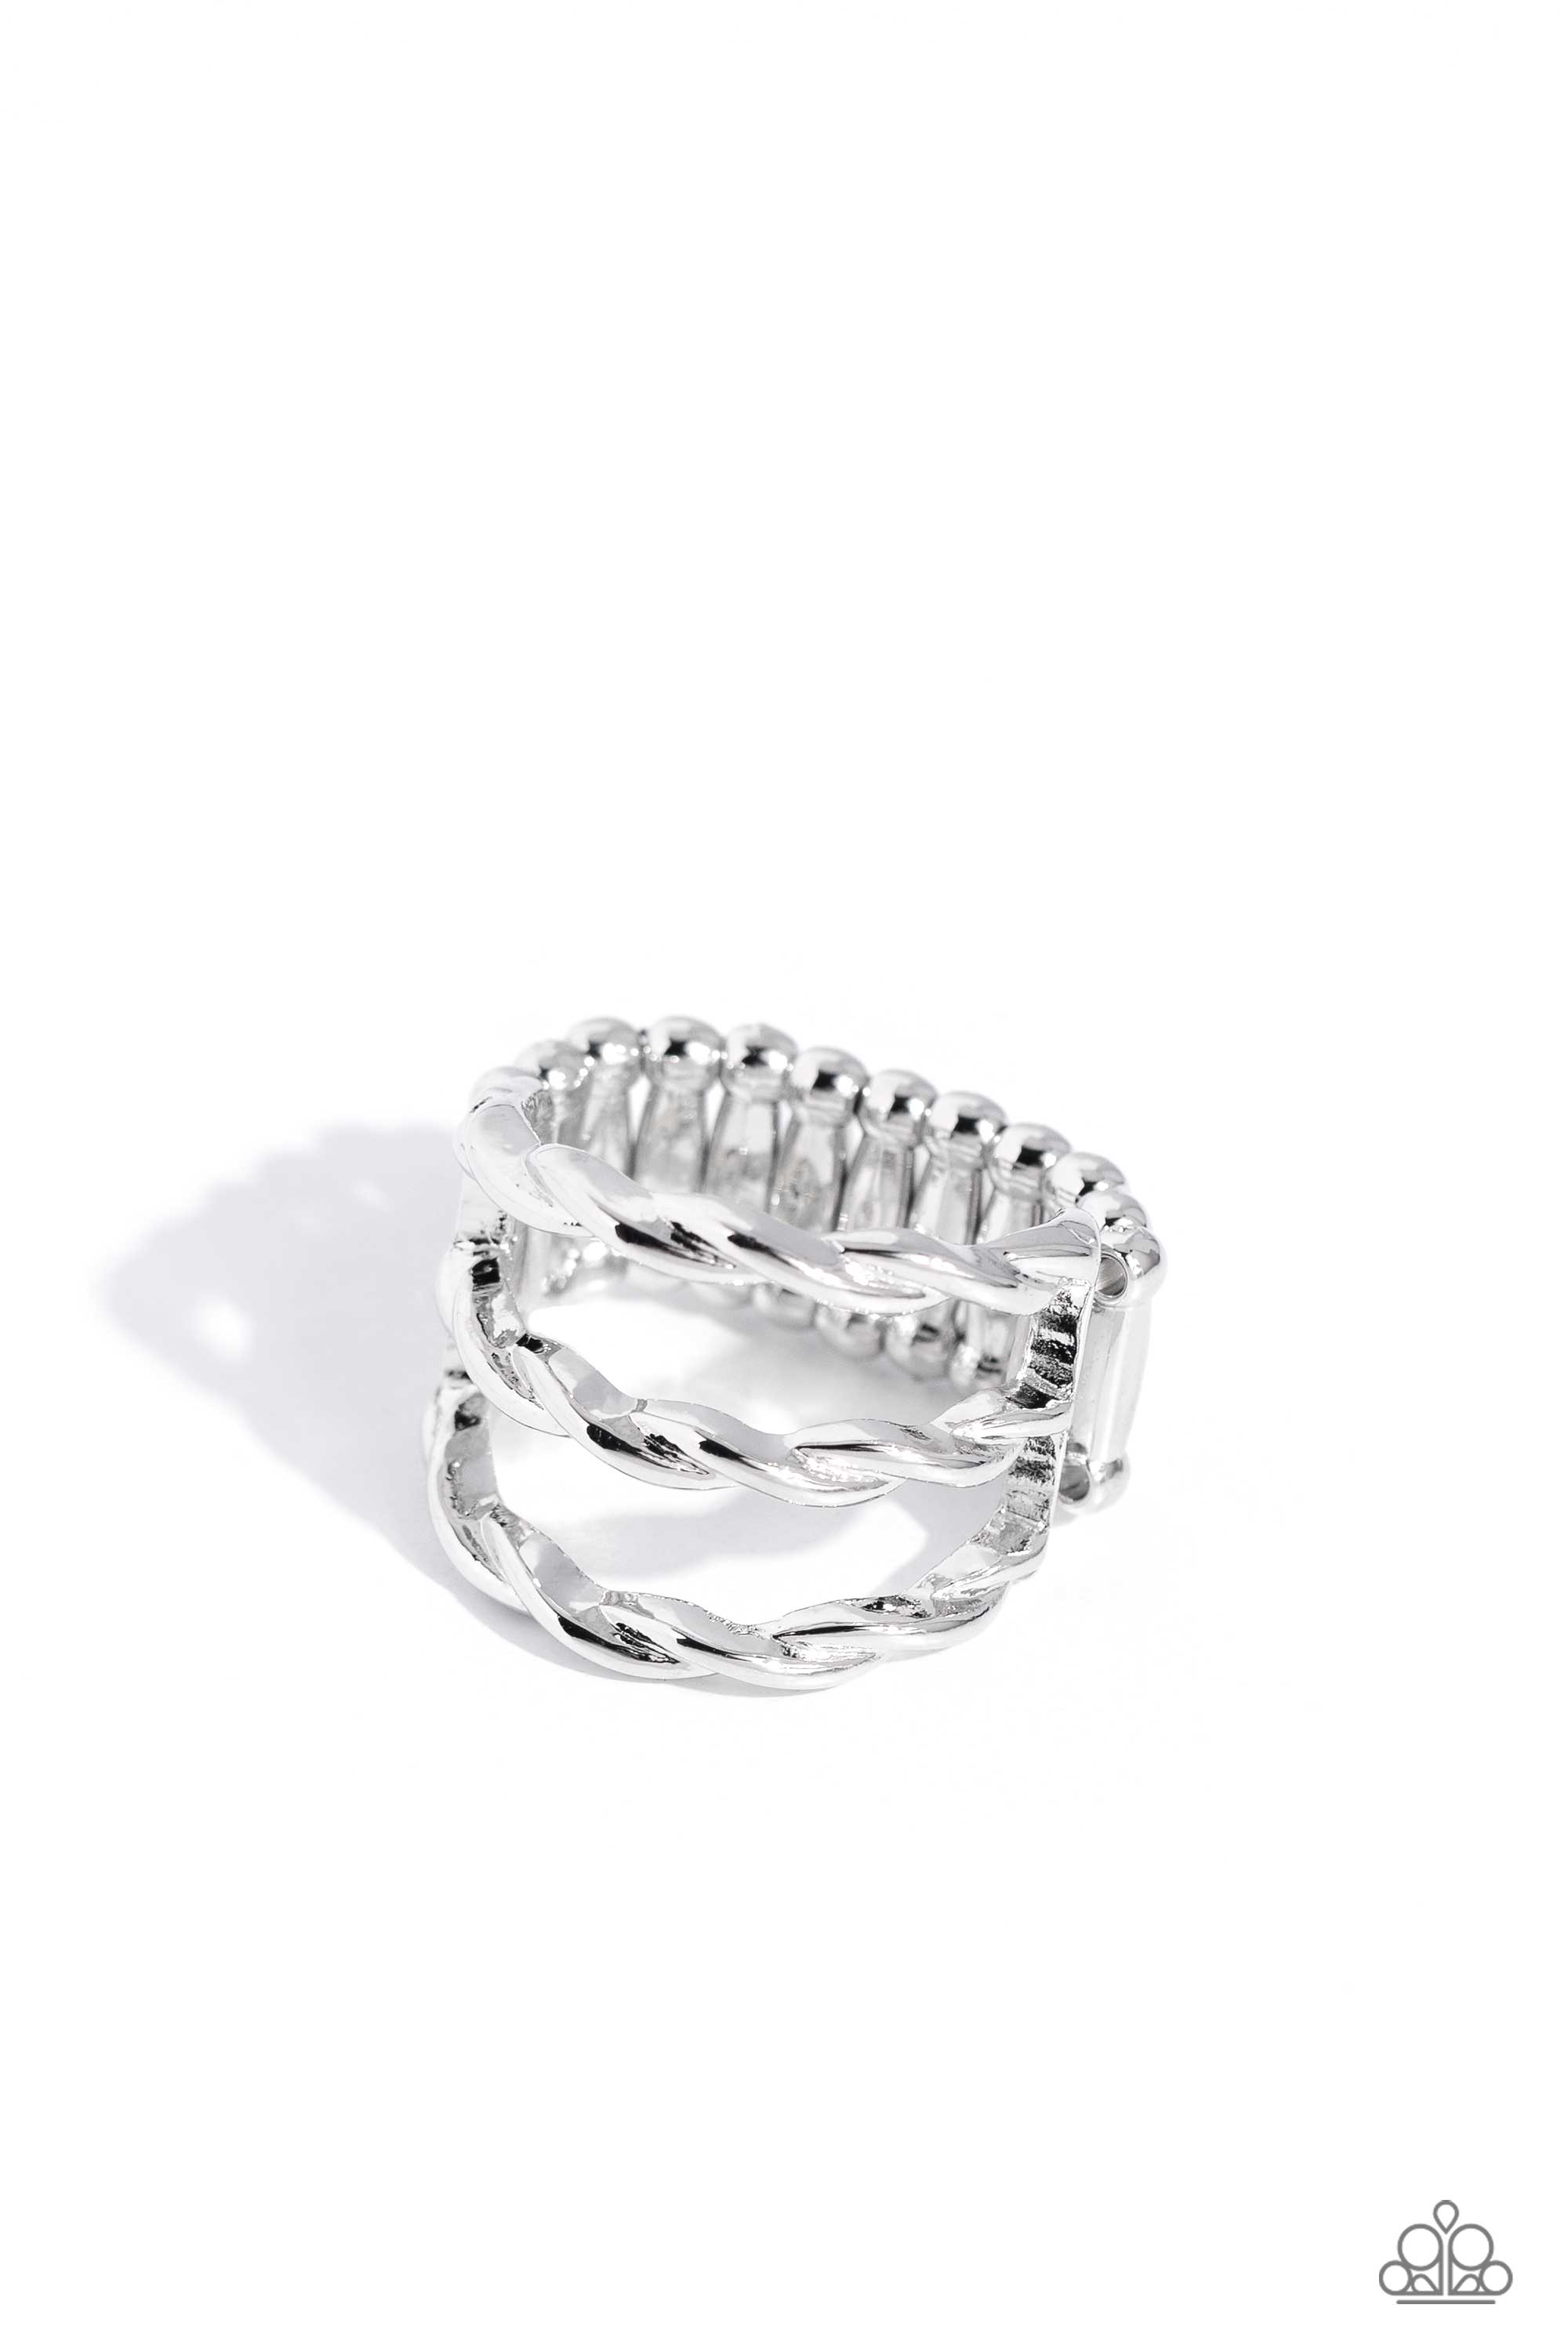 CORDED COMMAND SILVER-RING